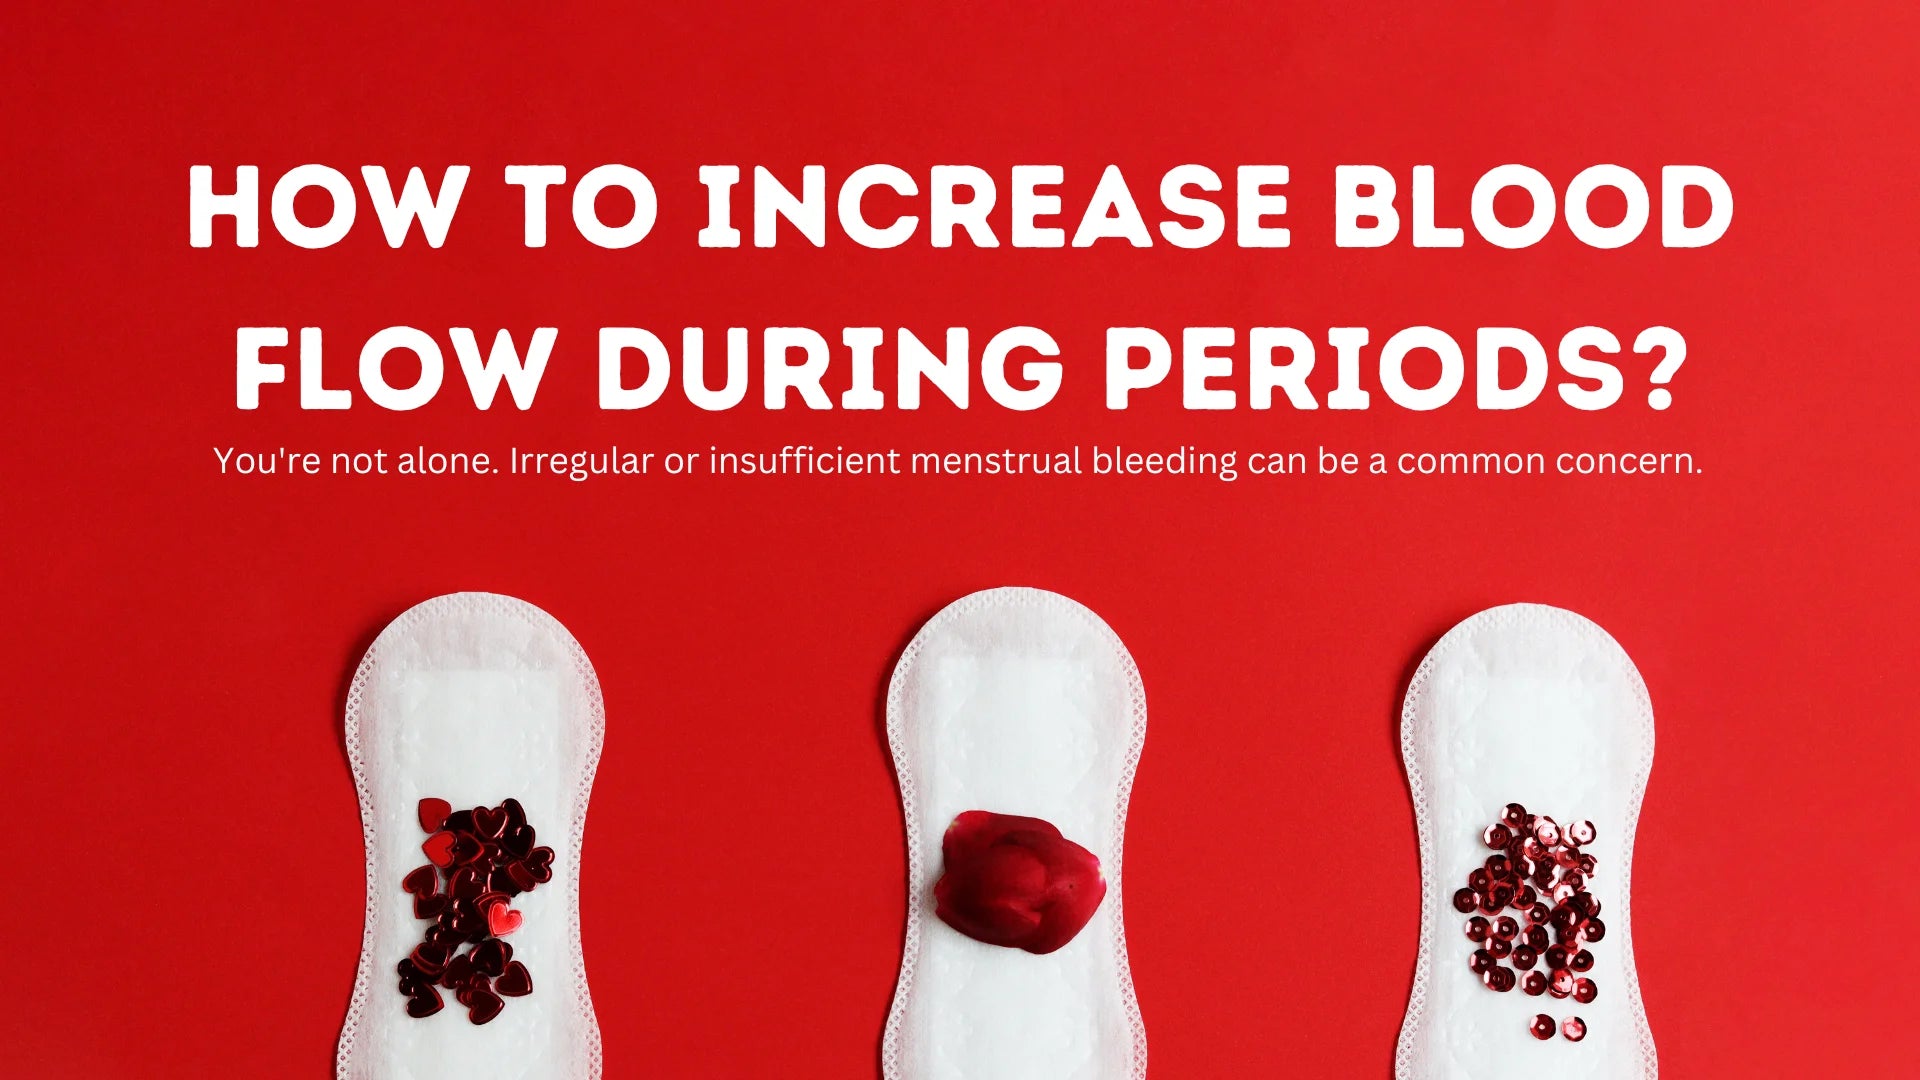 No Proper Blood Flow During Periods?